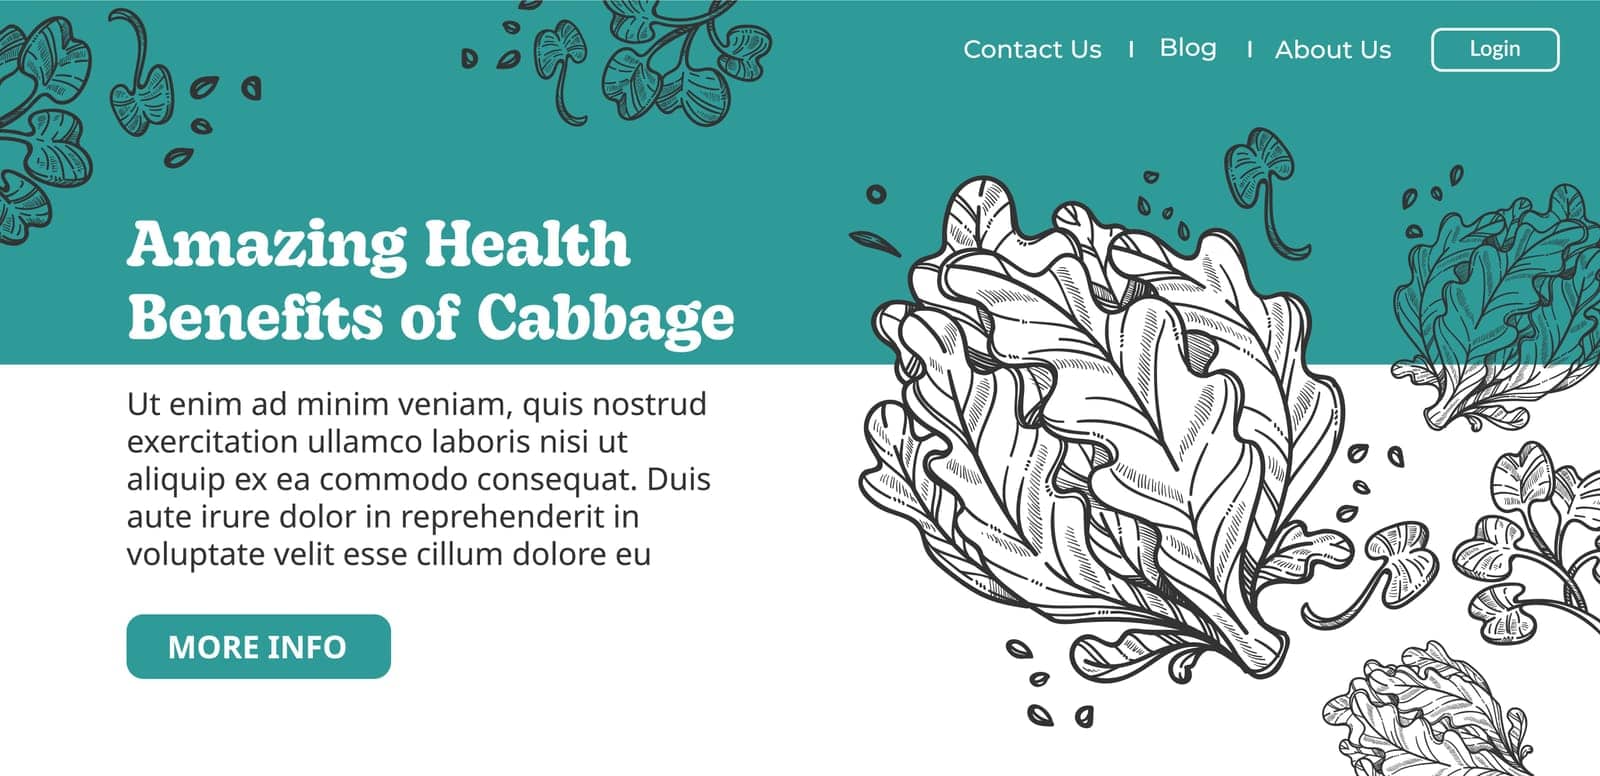 Amazing health benefits of cabbage website page by Sonulkaster